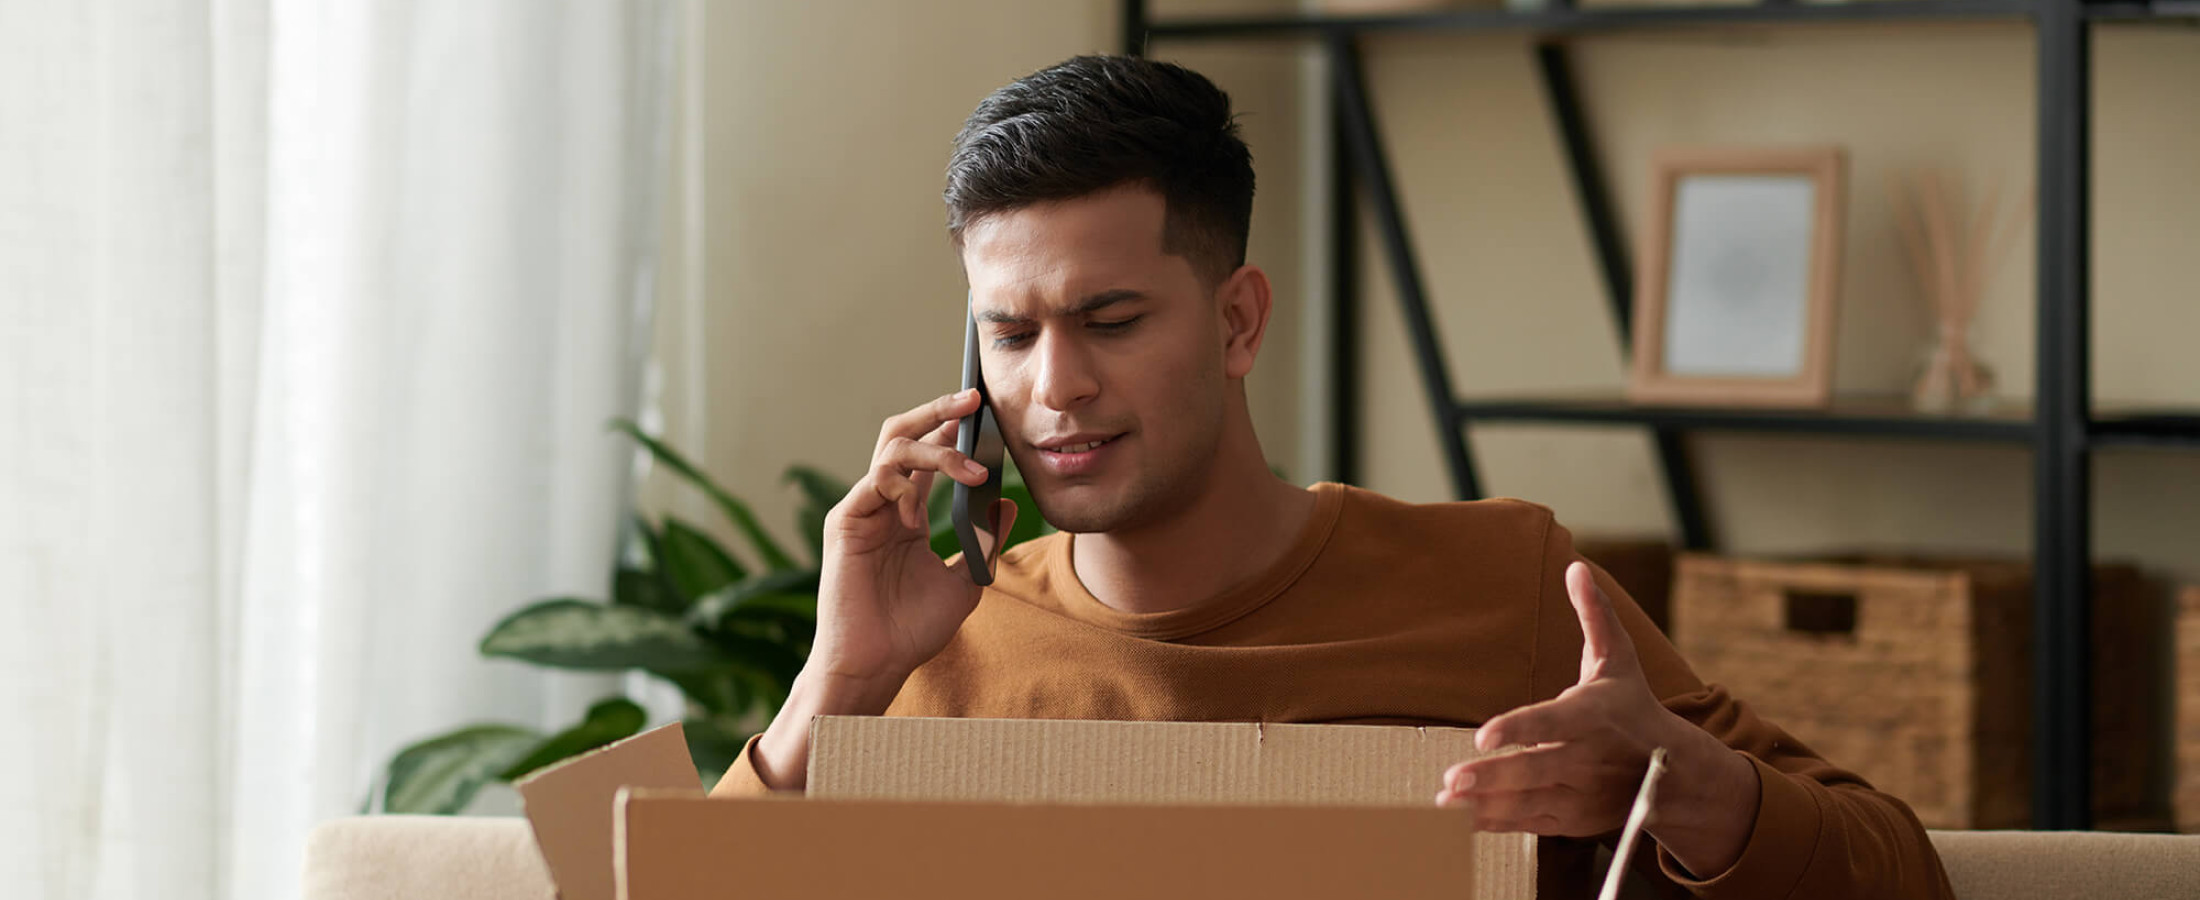 Your online order never arrives … what should you do?